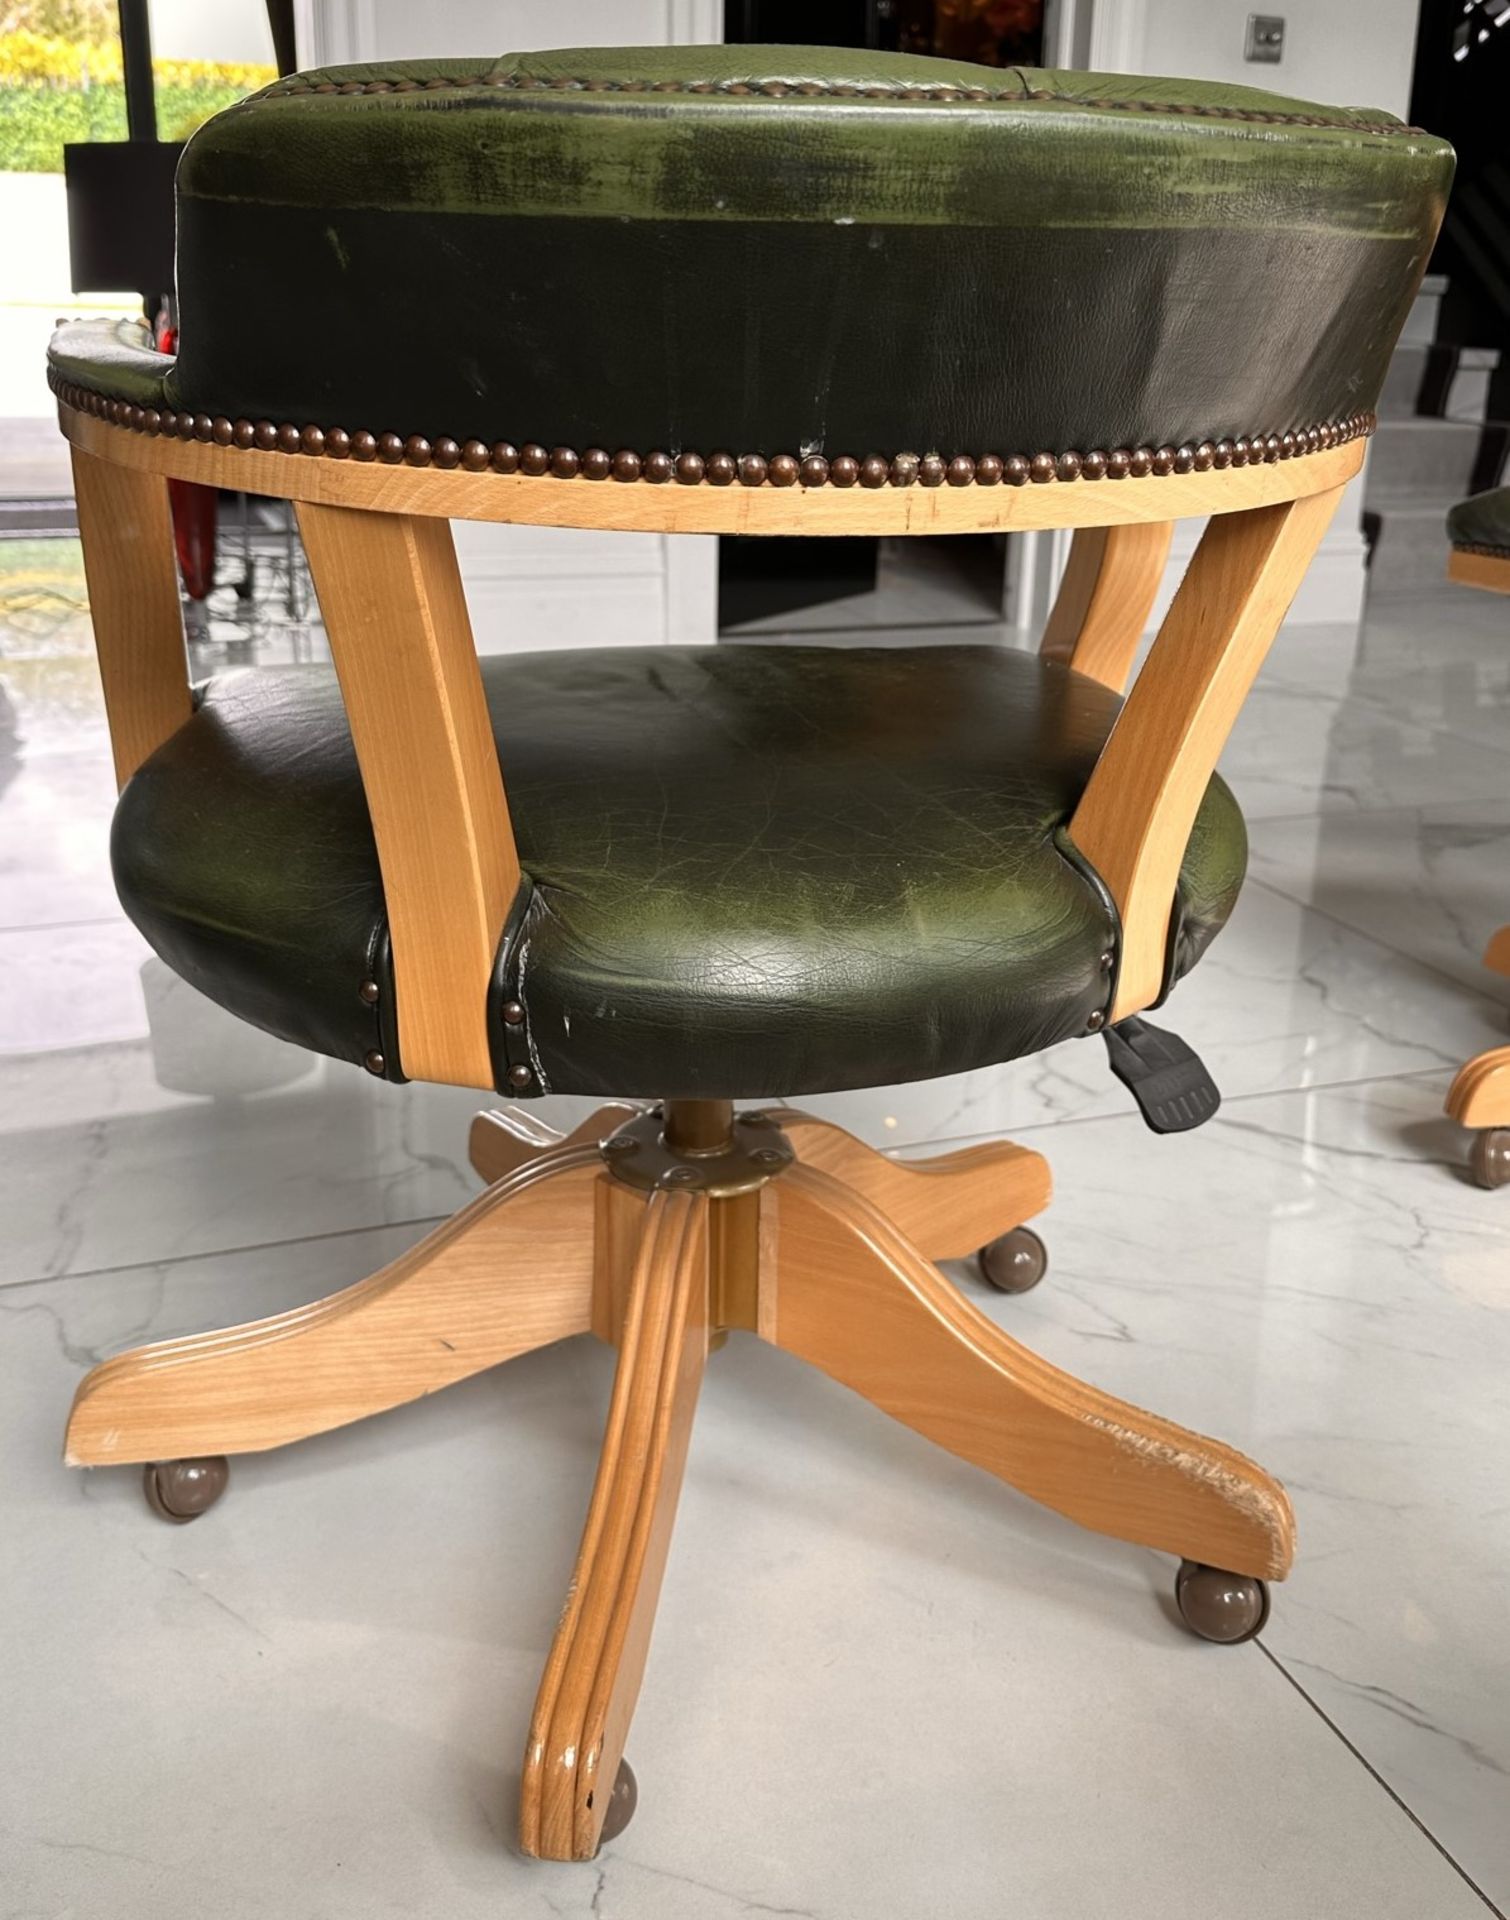 1 x VINTAGE 1970's Padded Captains Chair In Green Leather And Solid Wood Legs On Wheels - Image 3 of 4